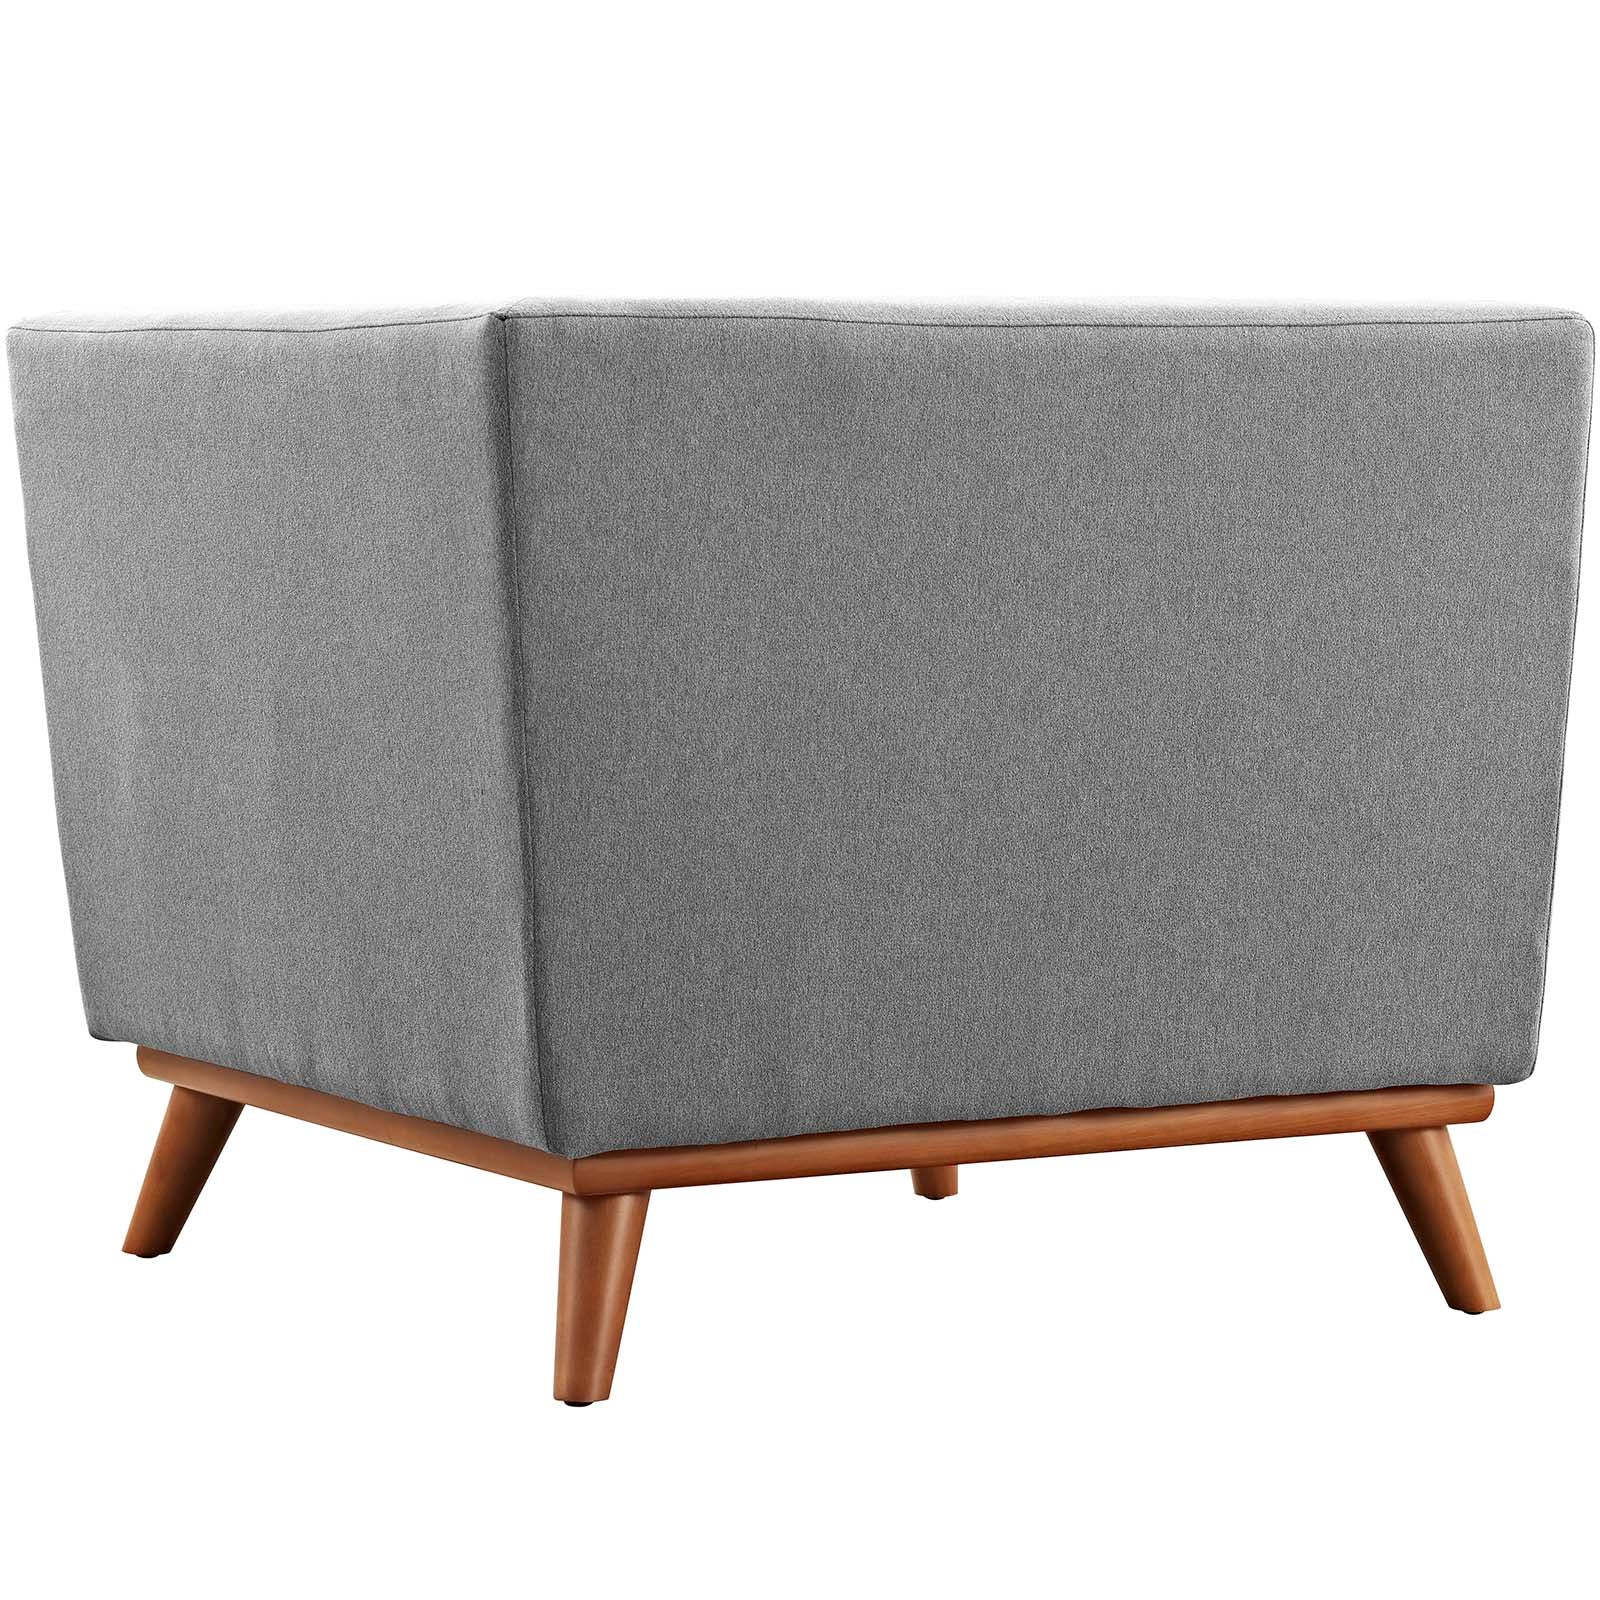 Engage Upholstered Fabric Corner Chair - East Shore Modern Home Furnishings